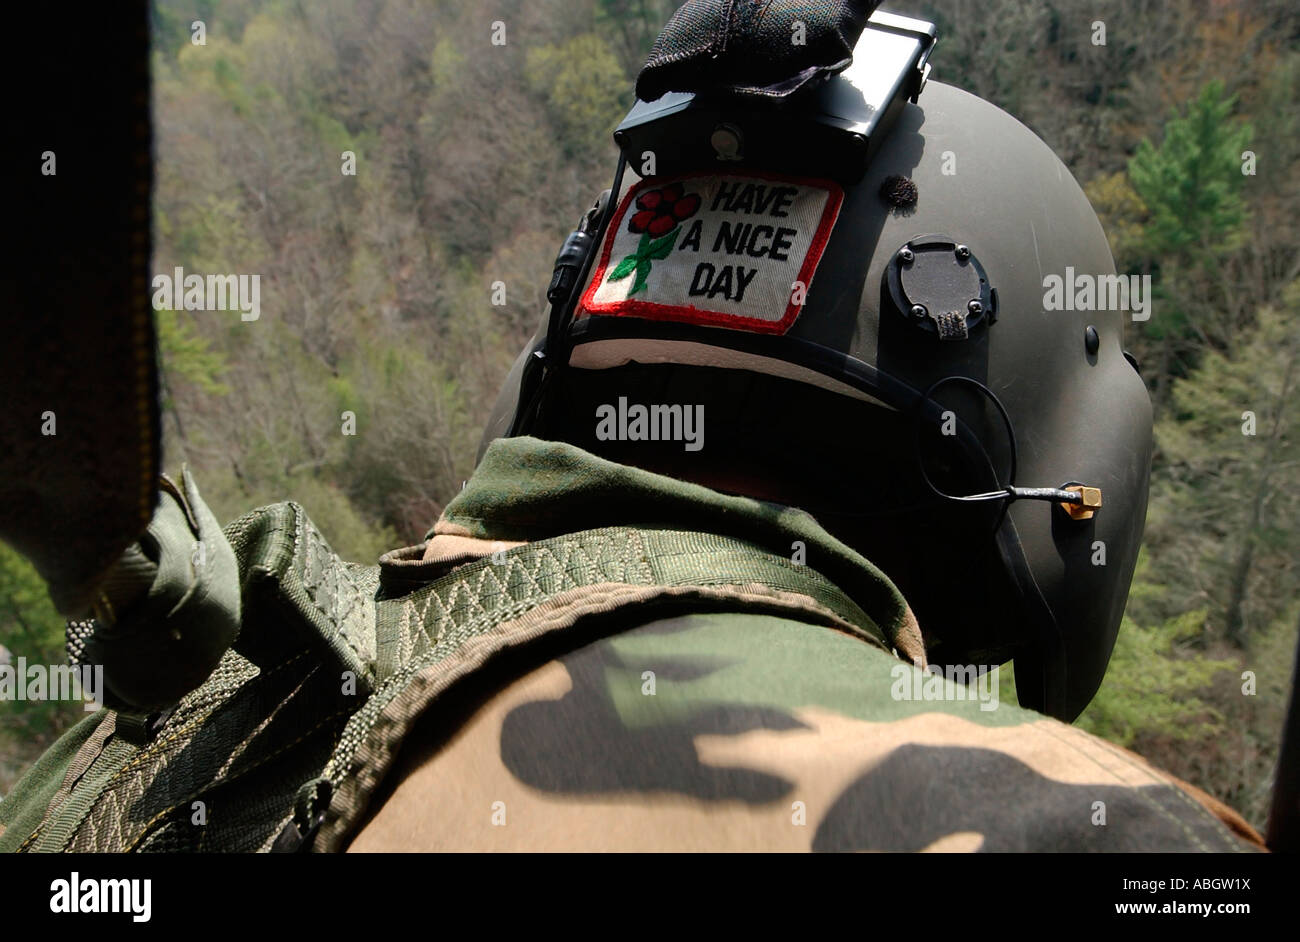 Black Hawk Helmet High Resolution Stock Photography and Images - Alamy